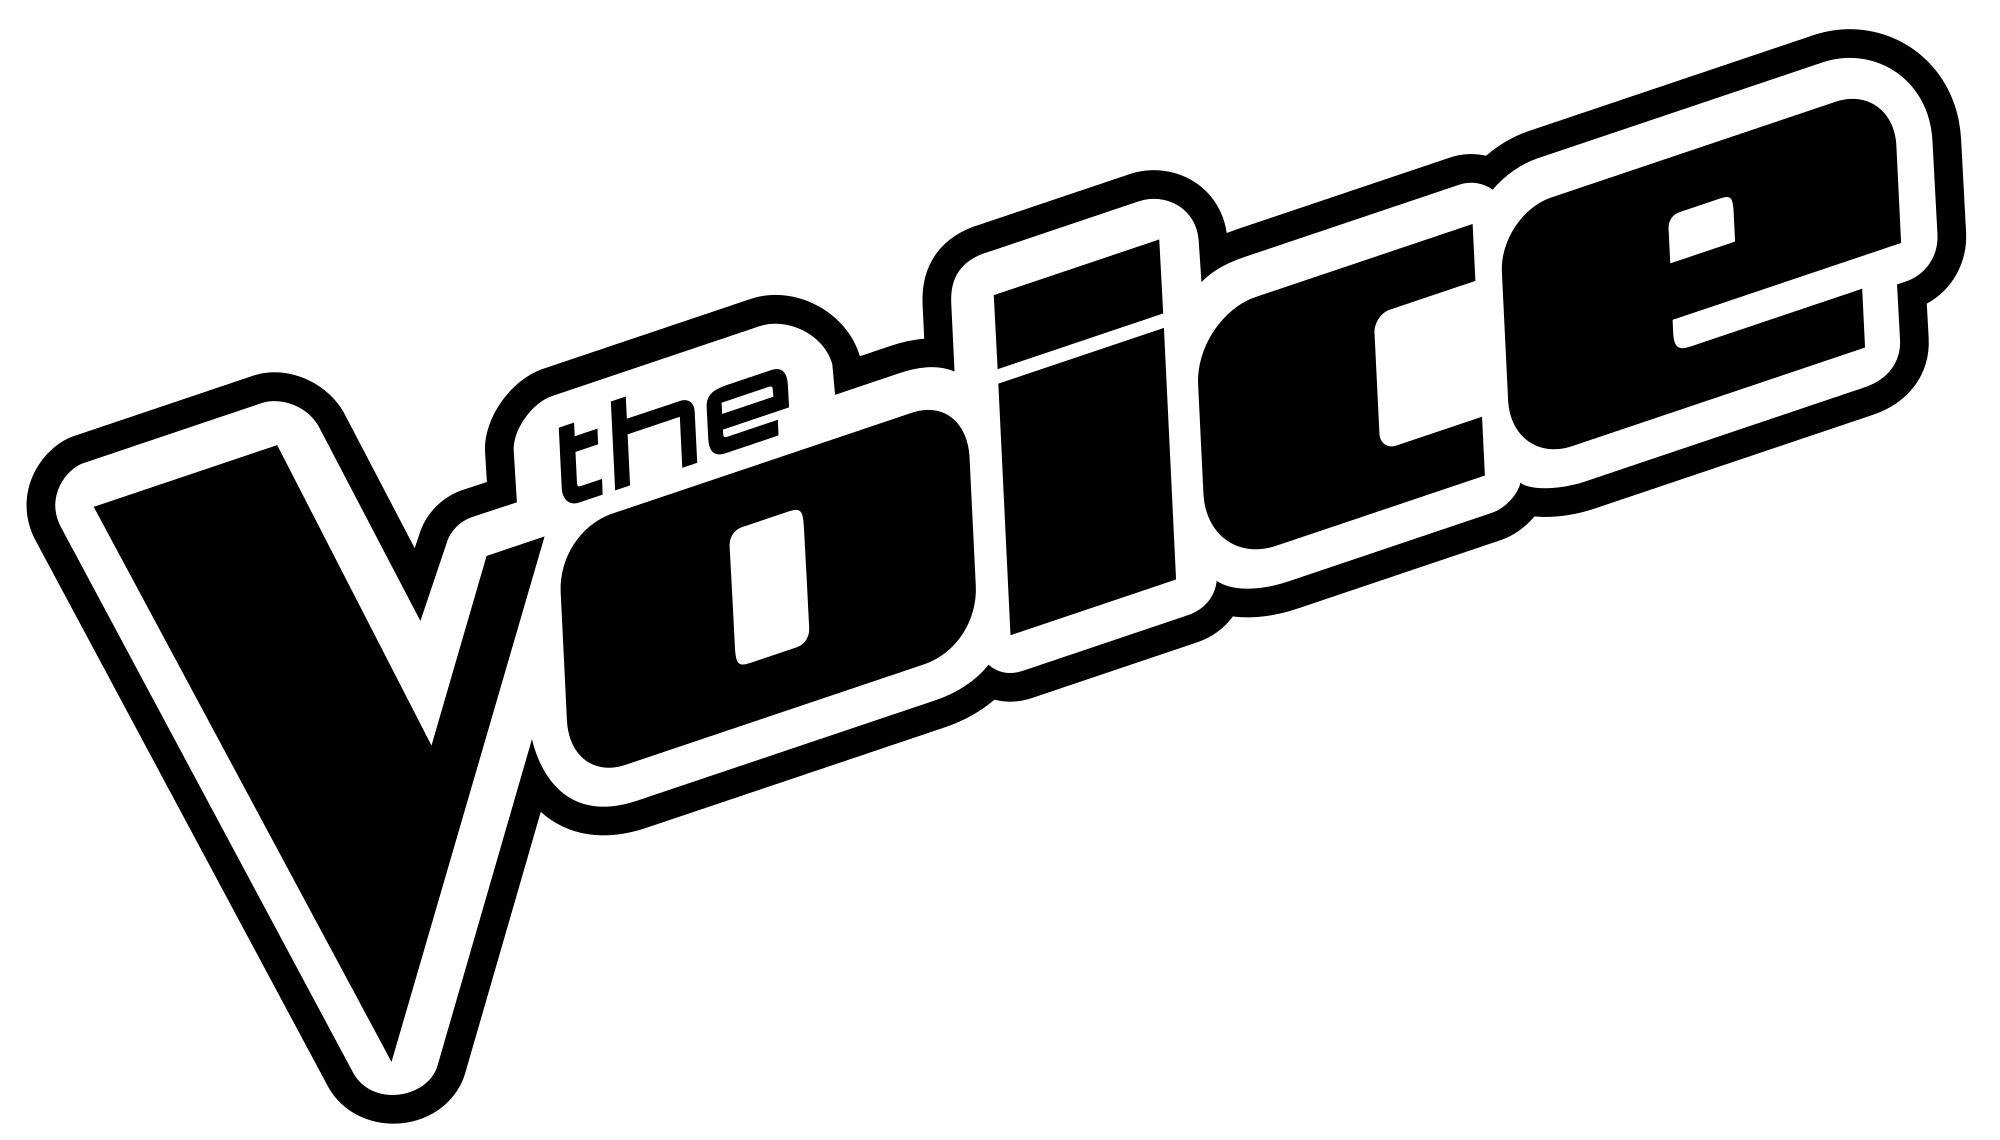 The Voice Logo - File:The Voice logo.svg - Wikimedia Commons